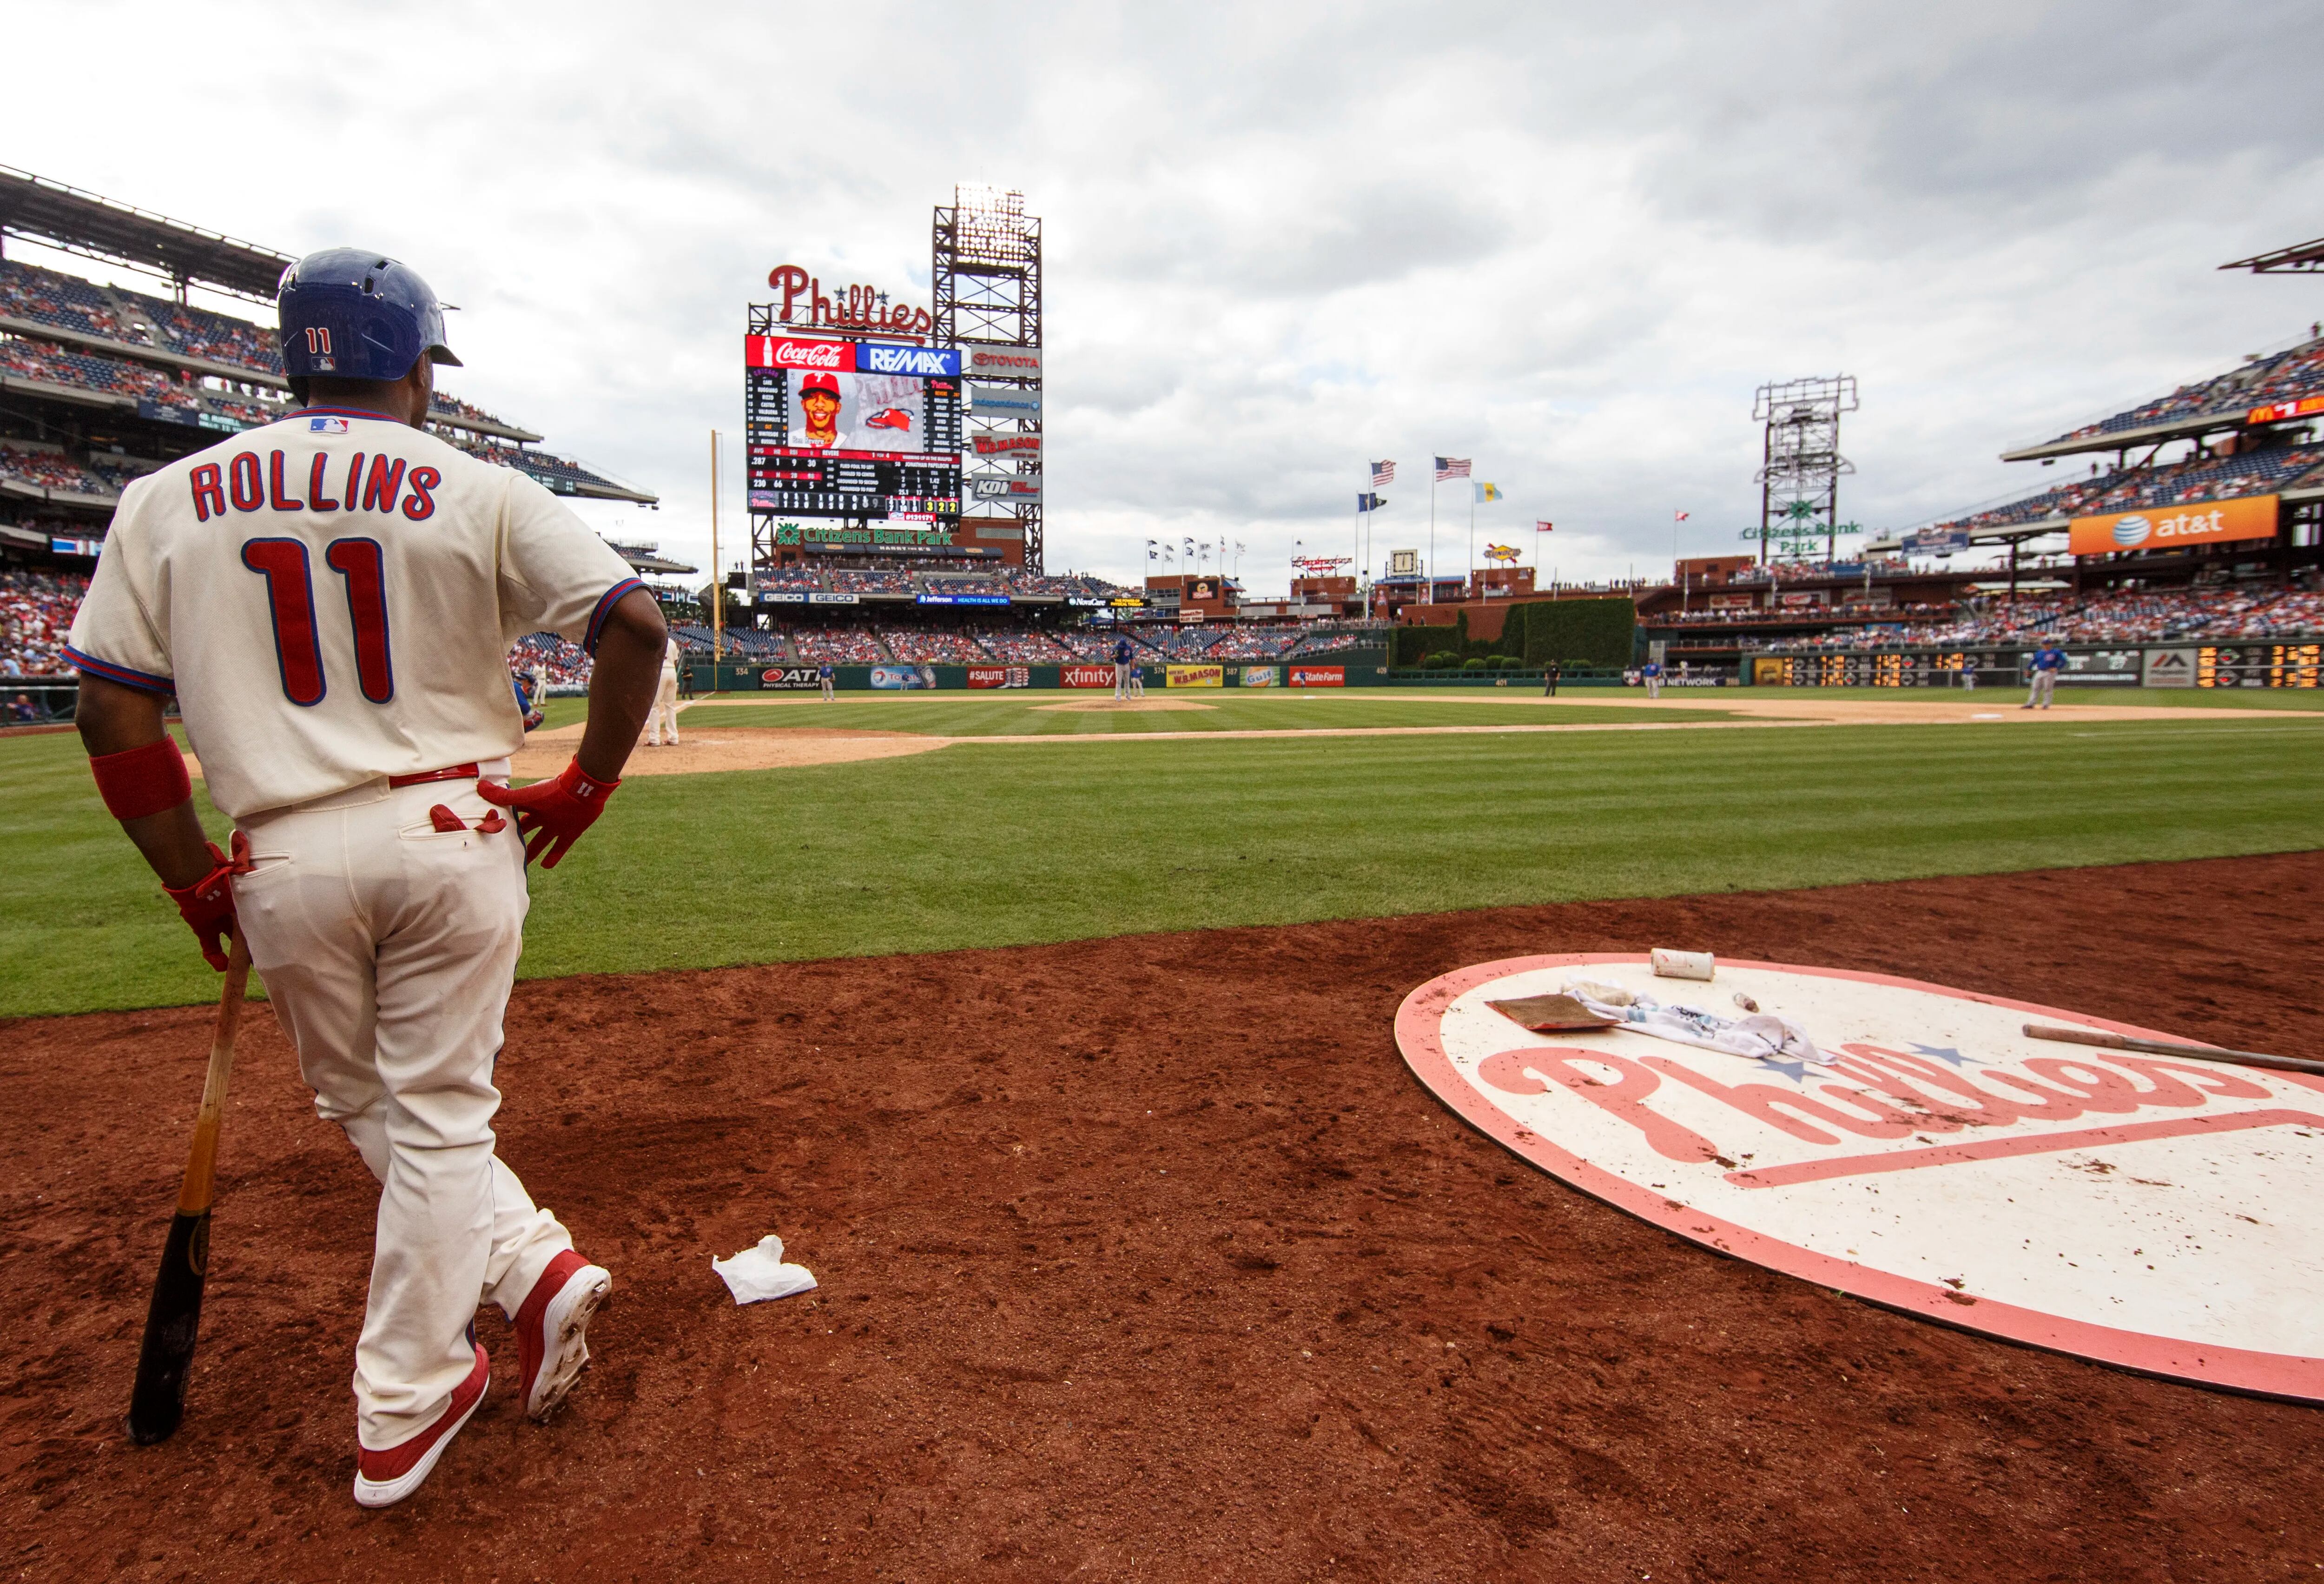 Will Jimmy Rollins be inducted into the Hall of Fame? – Philly Sports